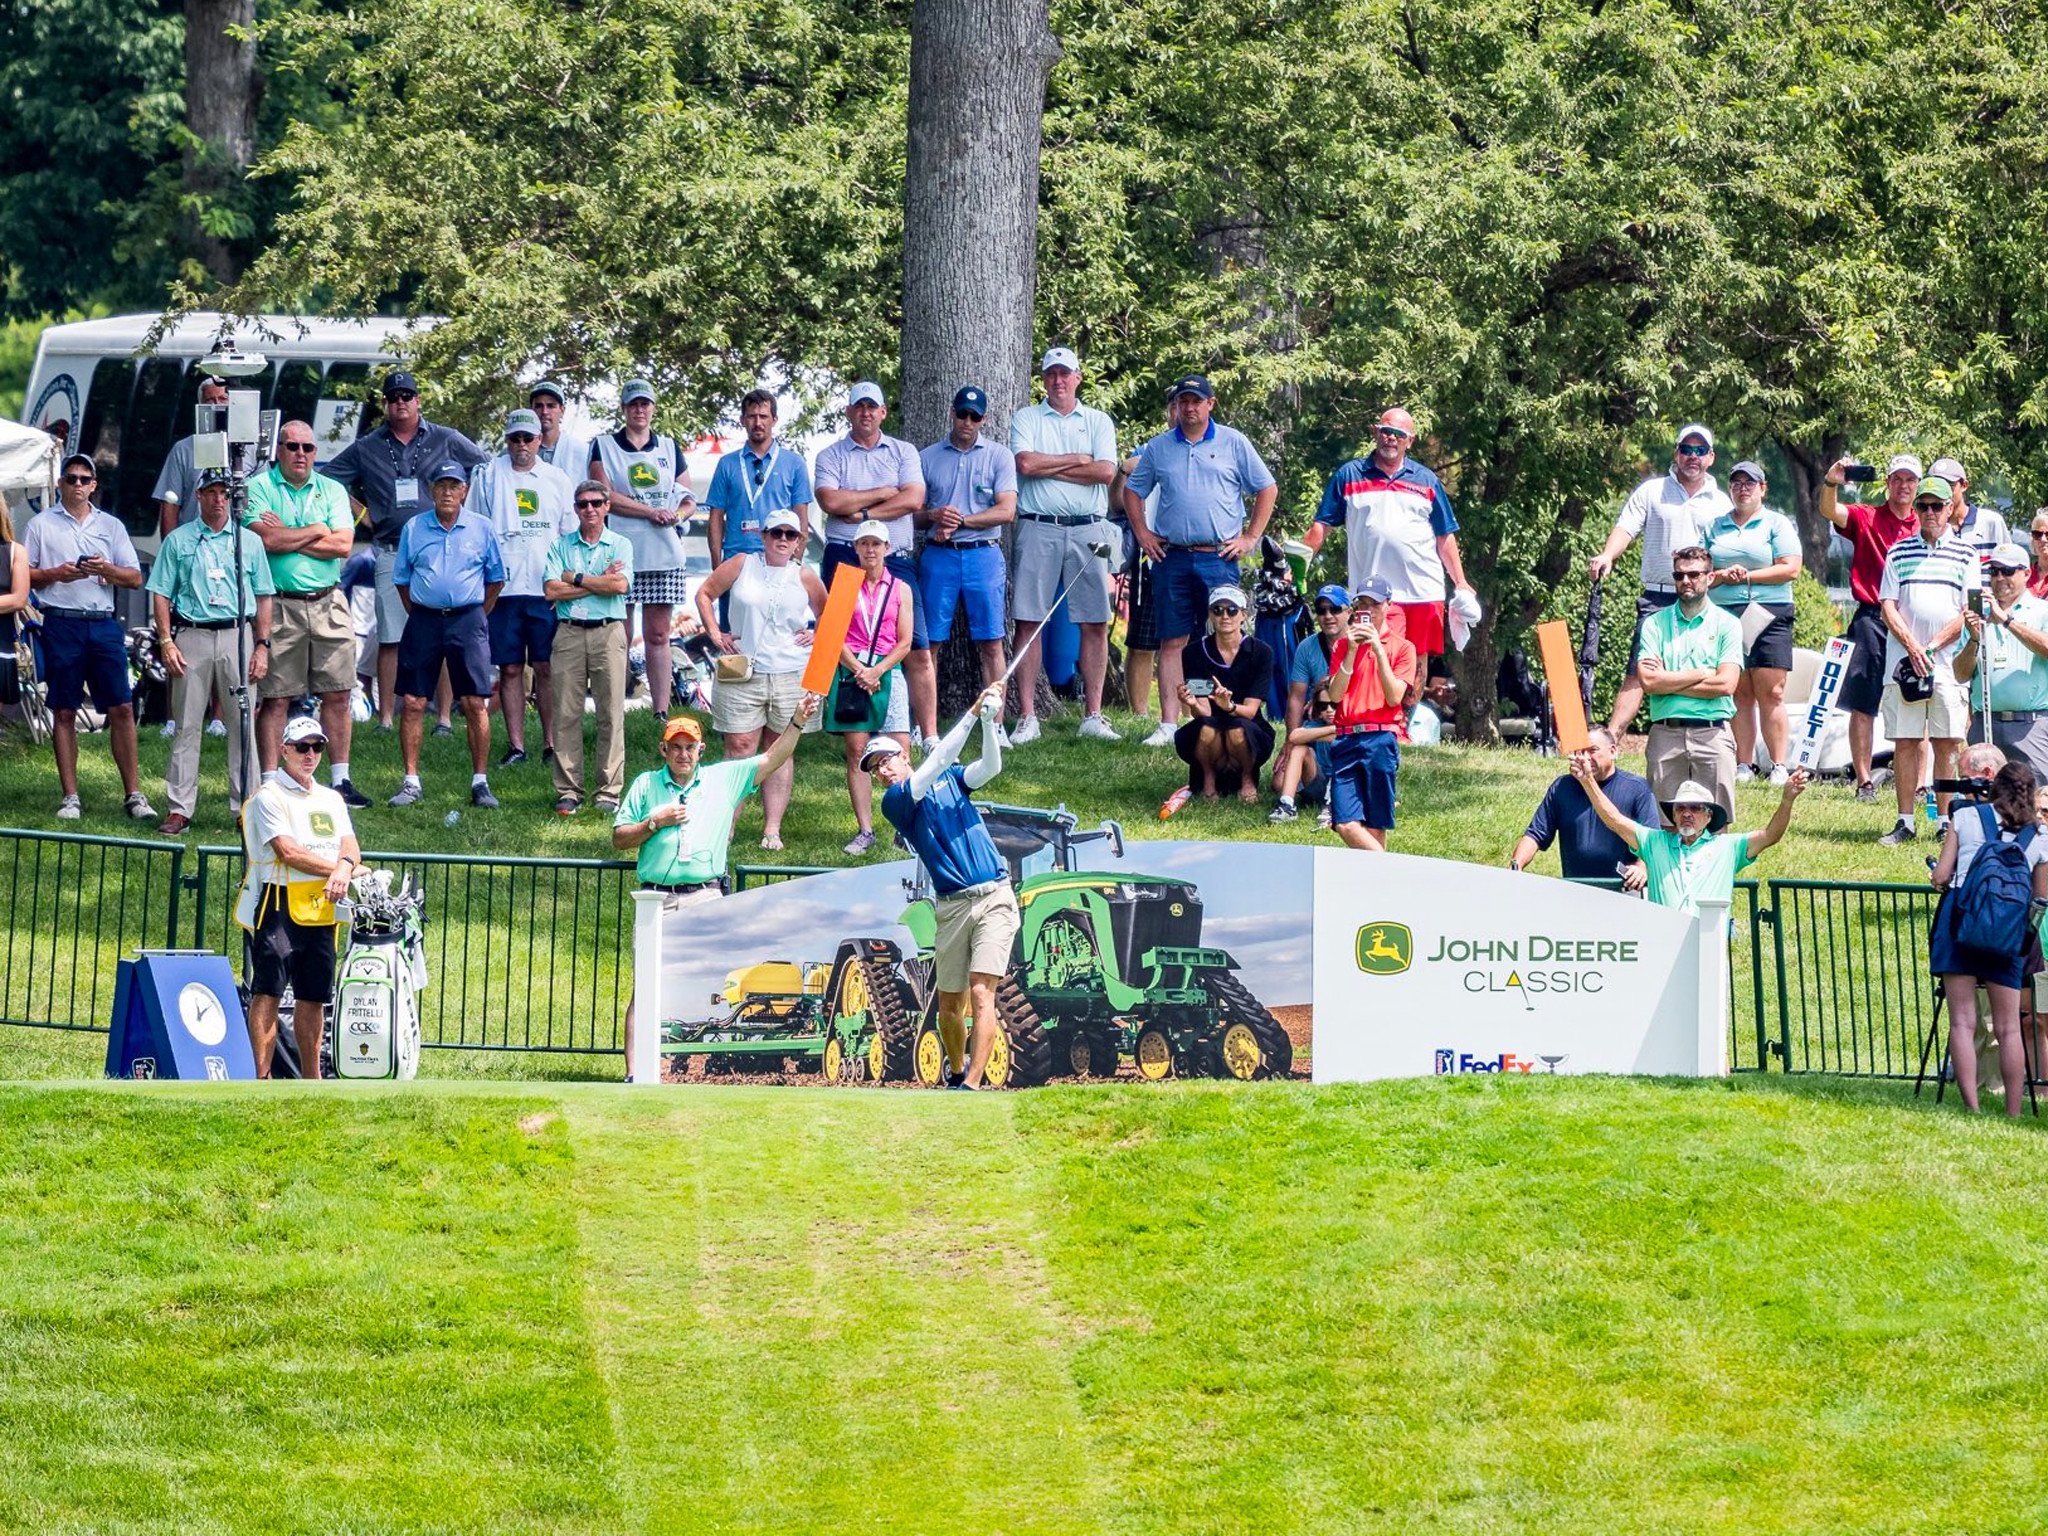 2021 John Deere Classic live stream How to watch PGA golf online from anywhere Android Central